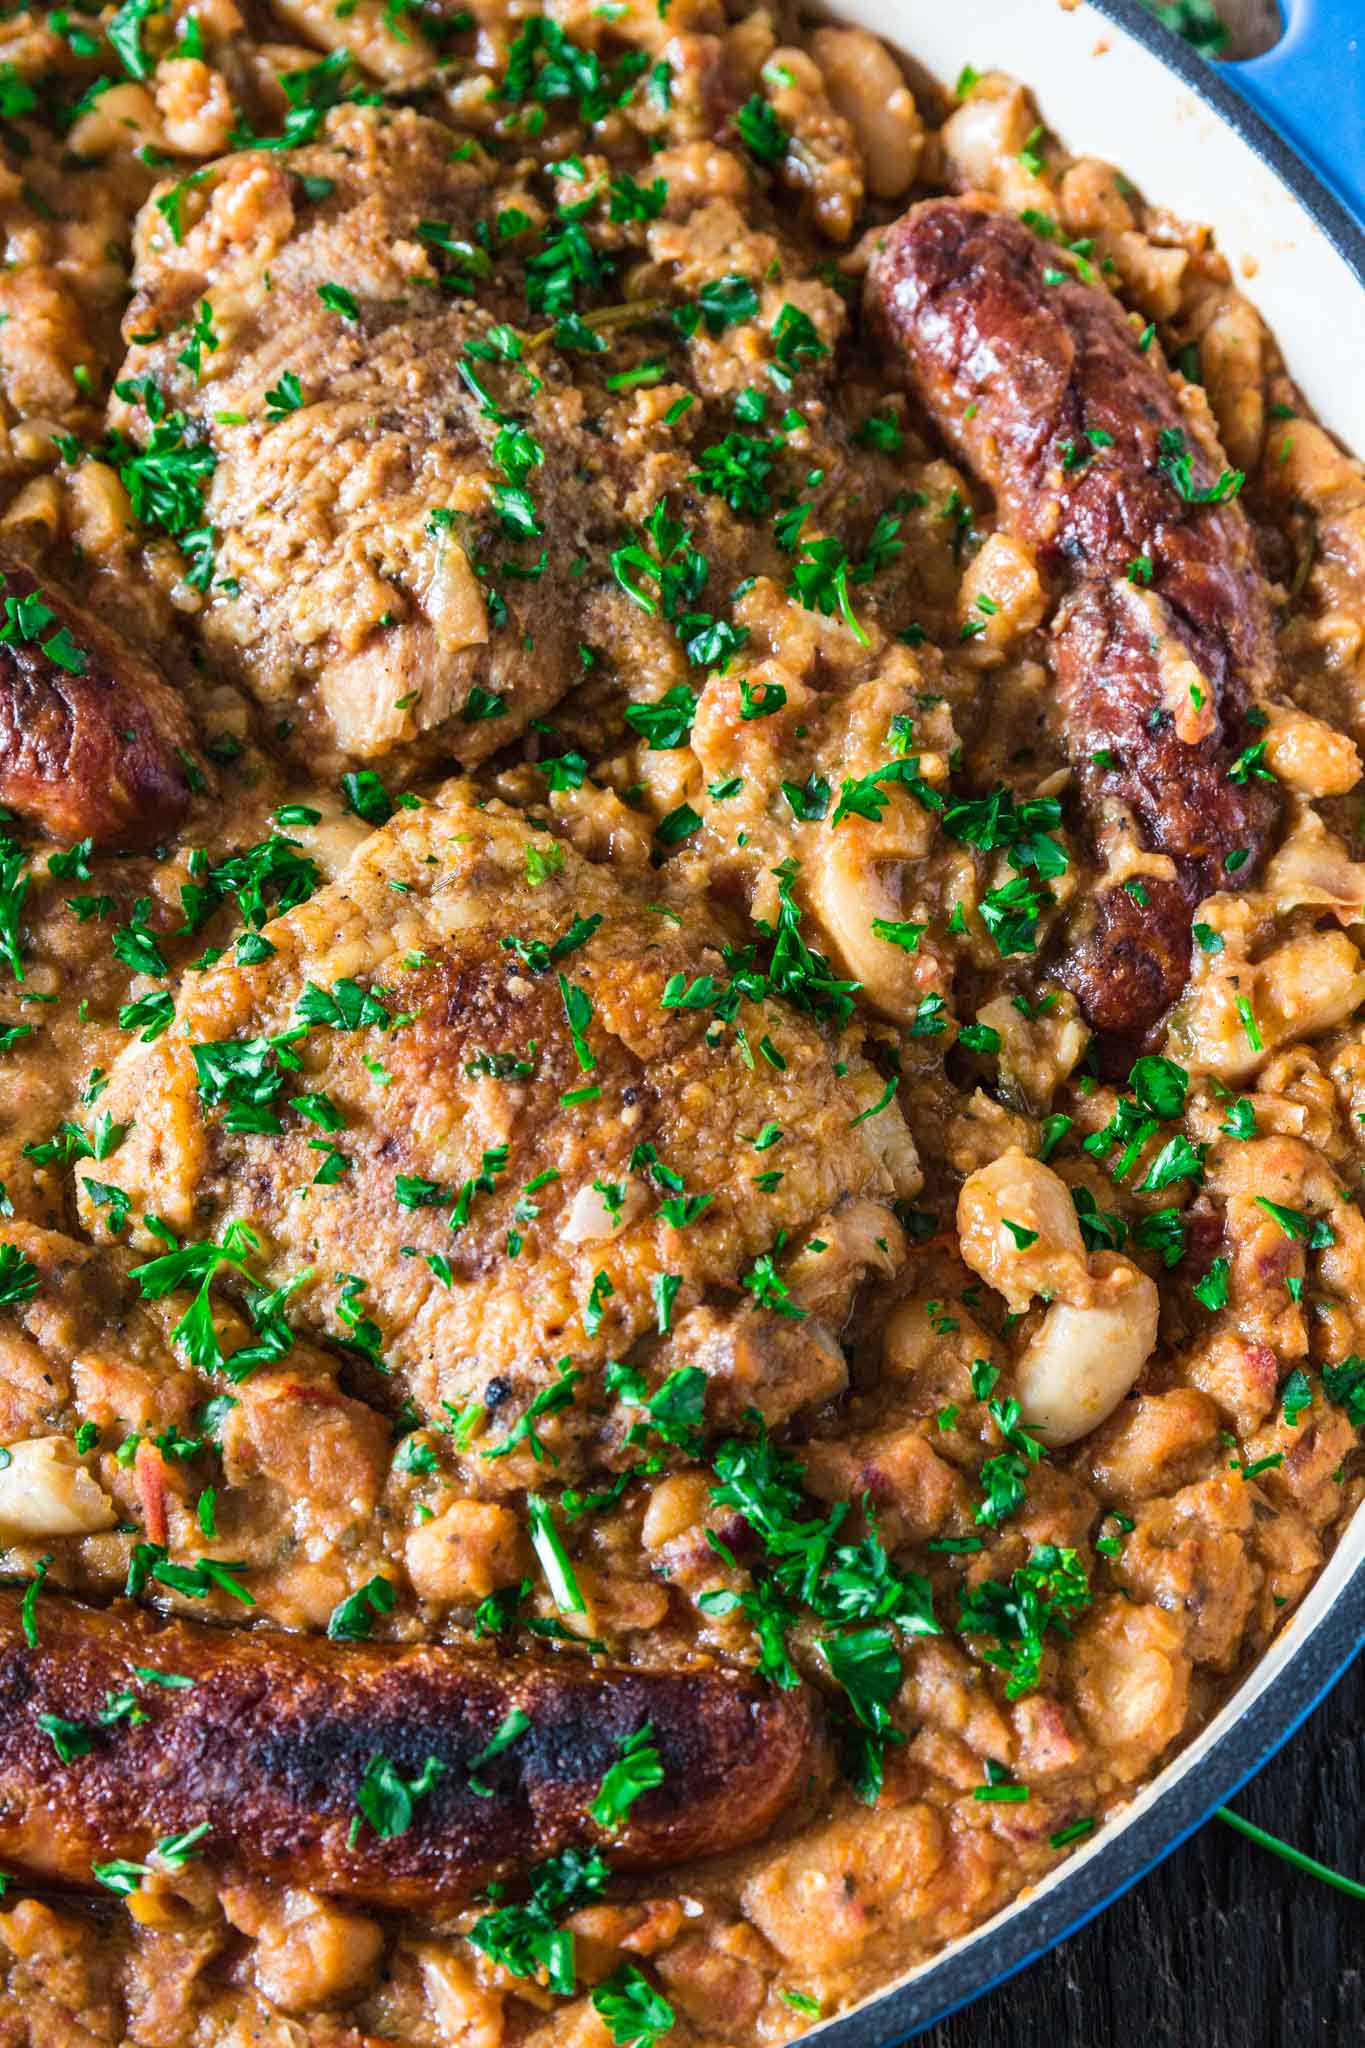 Sausage and Chicken Cassoulet | www.oliviascuisine.com | Inspired by the traditional French dish, this Sausage and Chicken Cassoulet is rich, hearty and perfect for cold winter days. It can be a labor of love, but - believe me - it is so worth it!